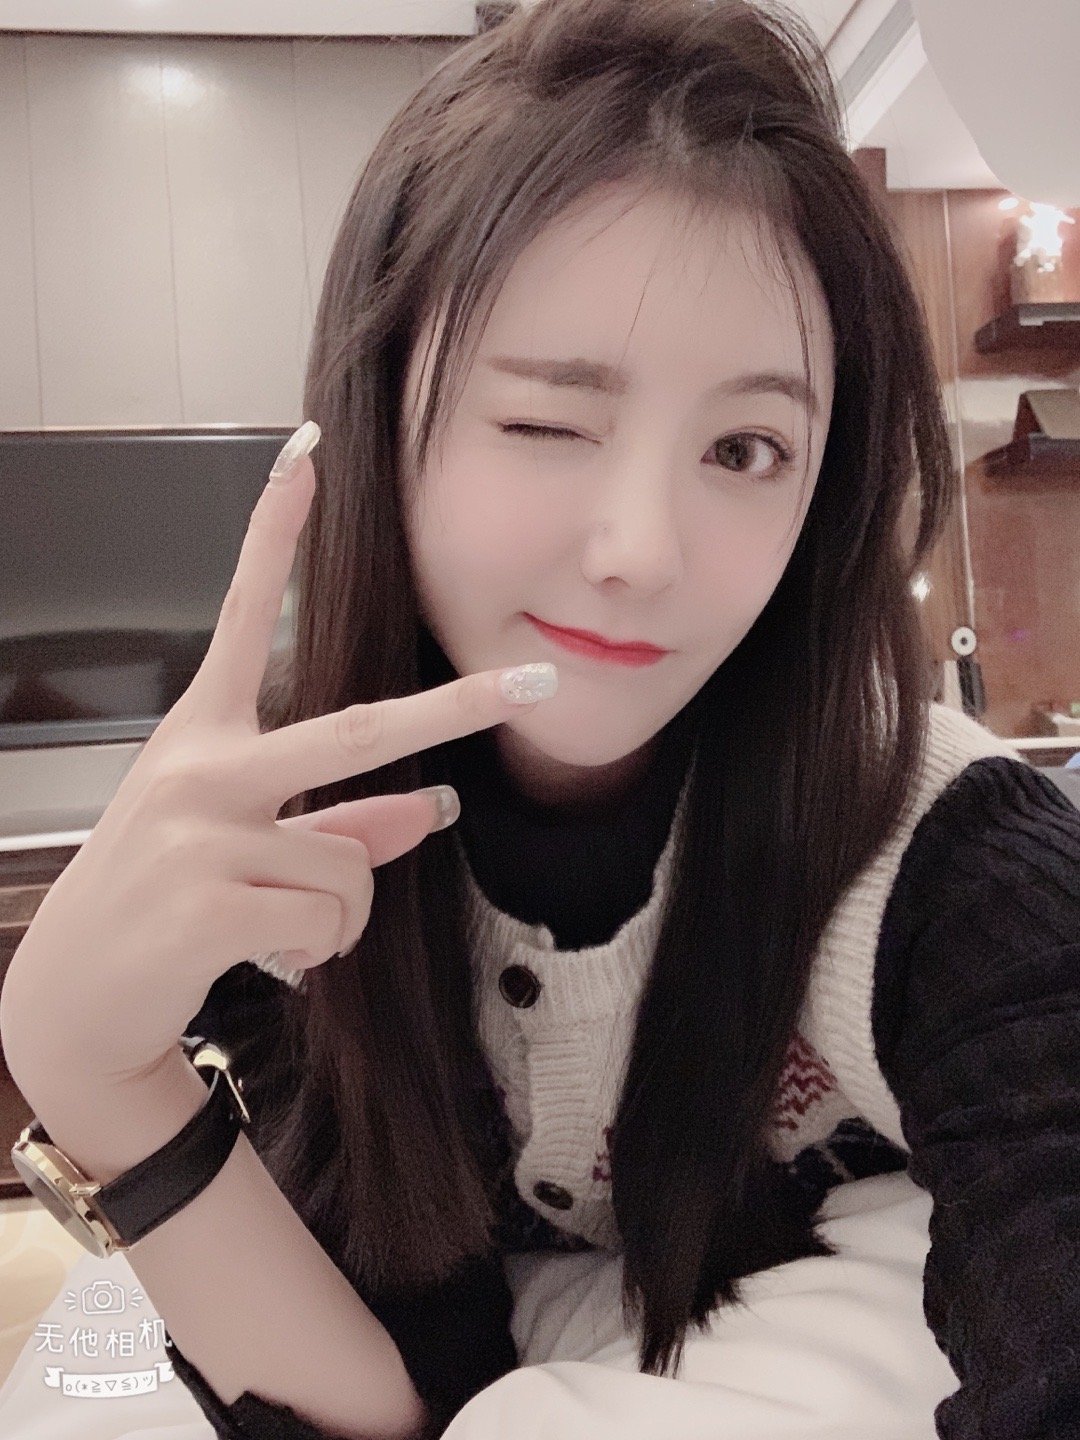 Daily Cpop News on Twitter: "Chinese Girl Group #SING女团's member  image